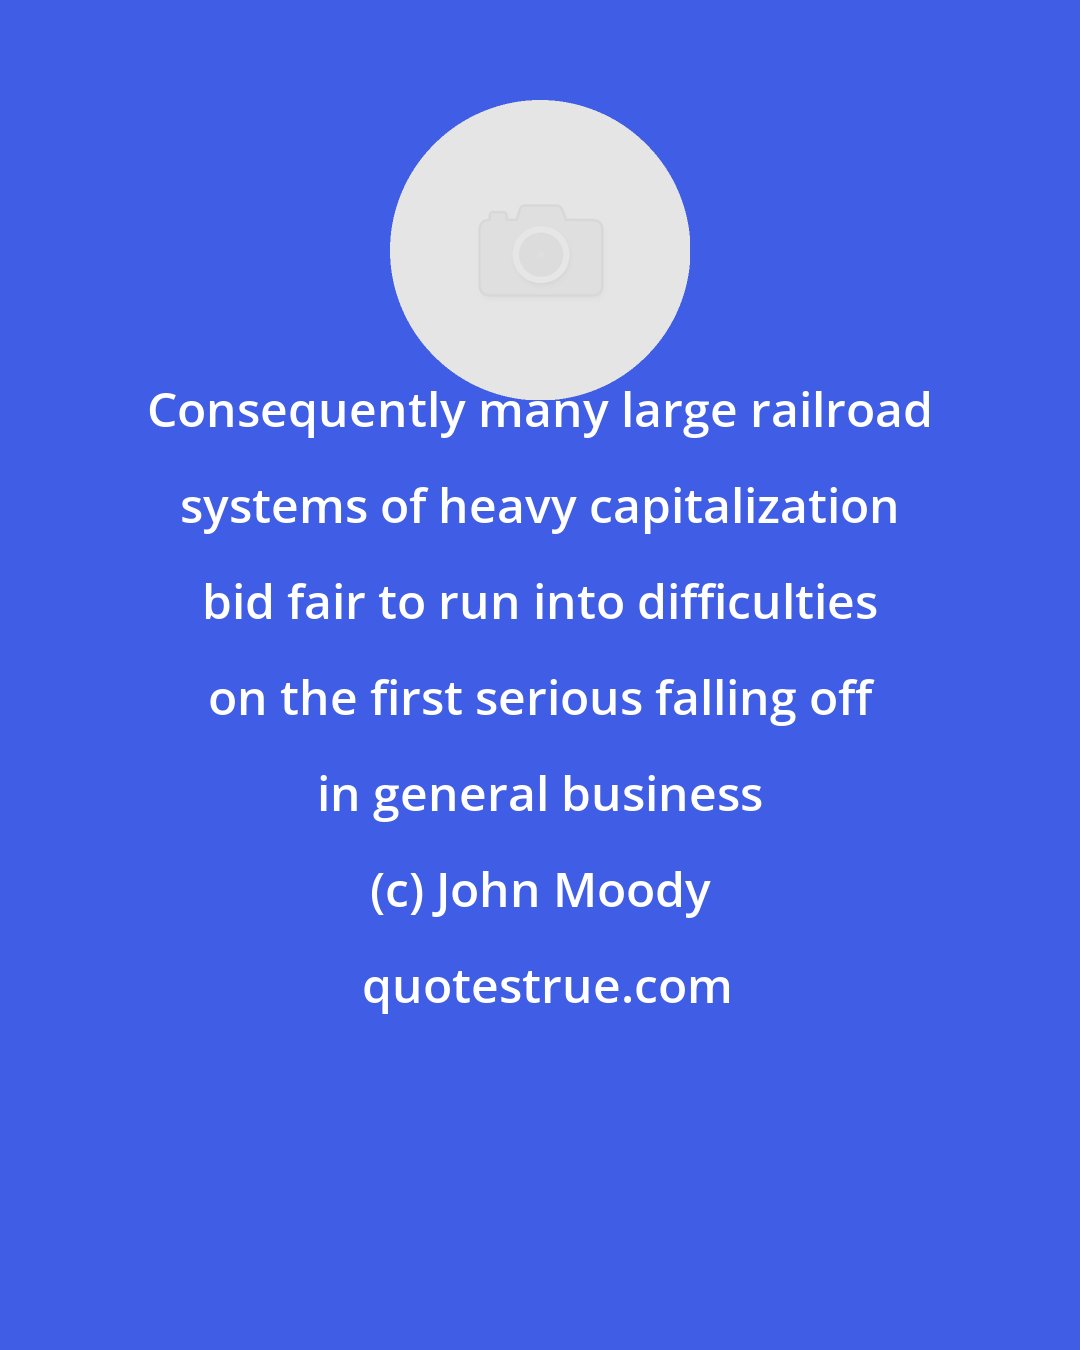 John Moody: Consequently many large railroad systems of heavy capitalization bid fair to run into difficulties on the first serious falling off in general business